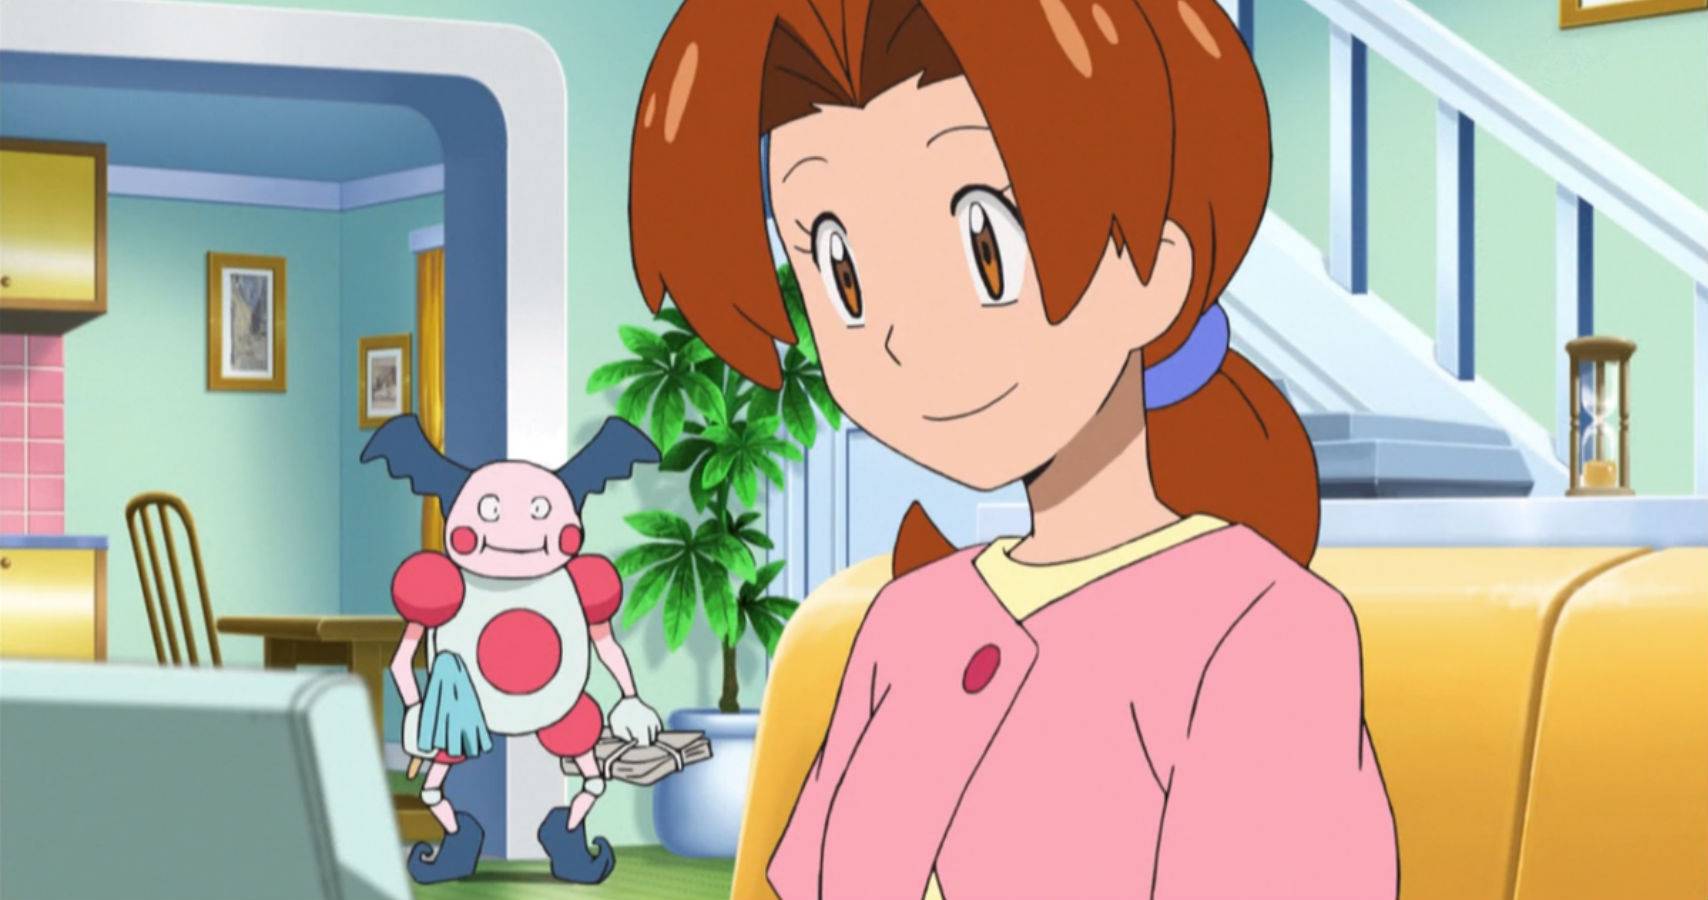 Delia ketchum and mister mime